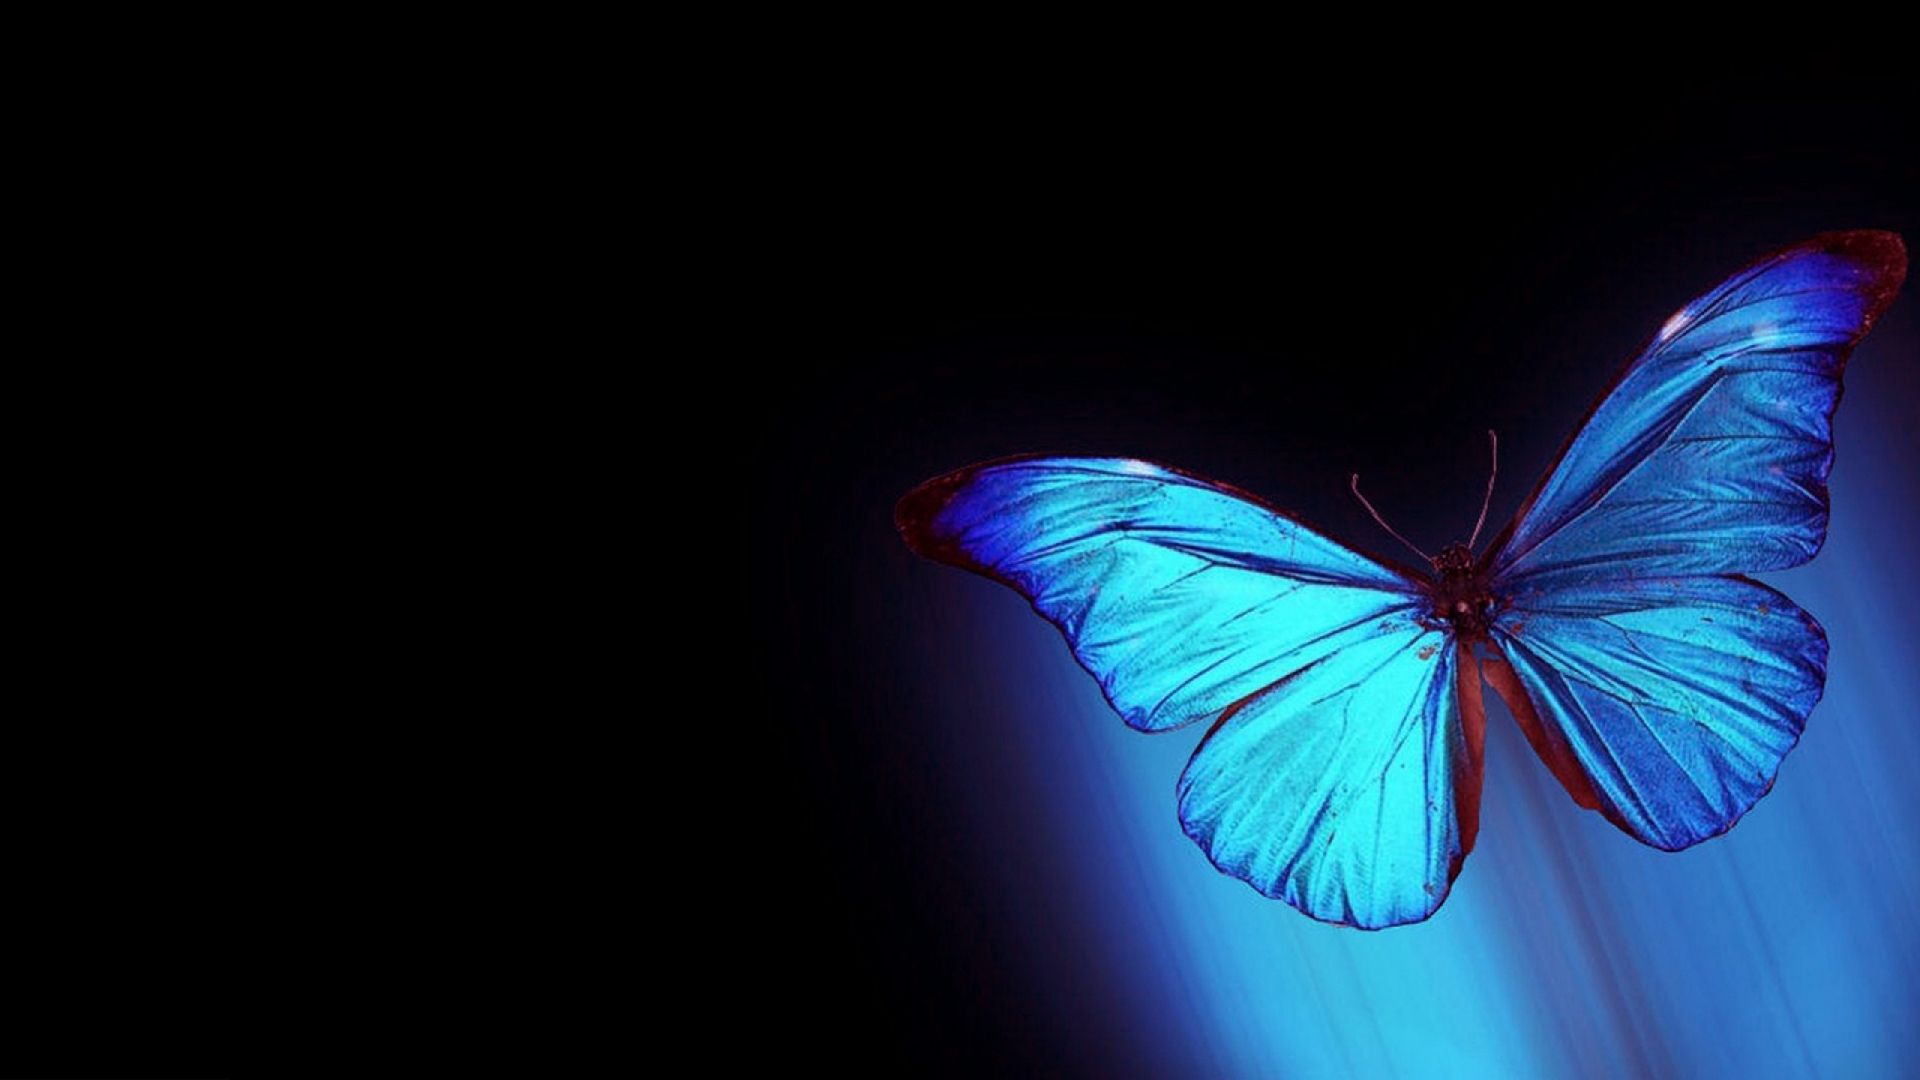 Free download and Blue Butterfly Wallpaper in High Resolution at